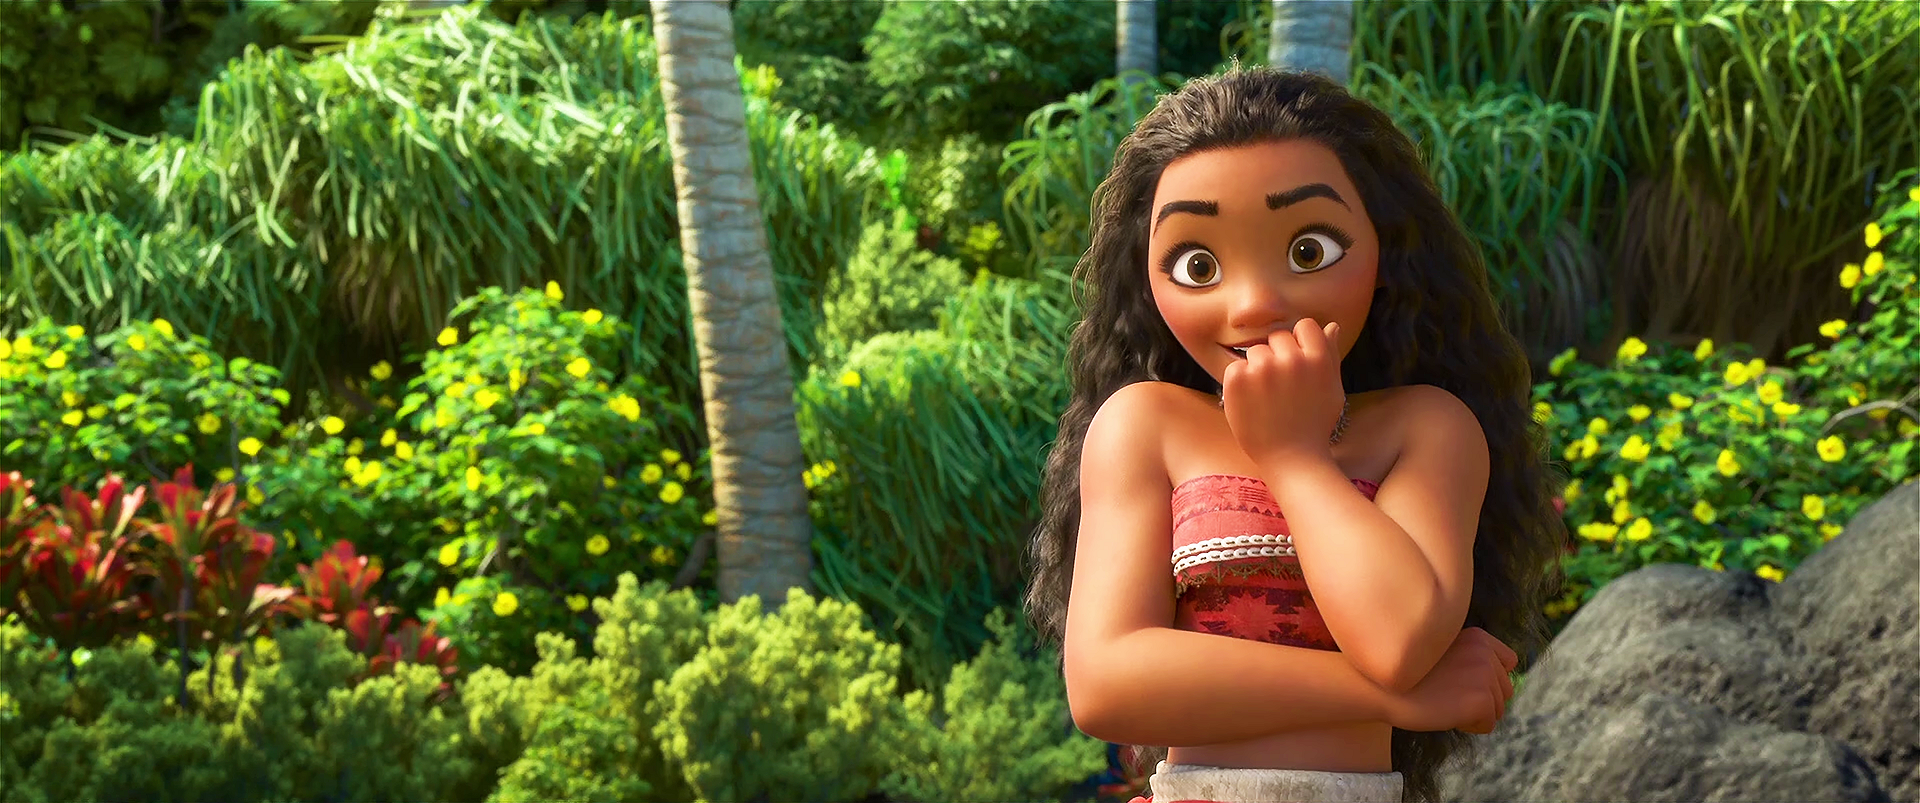 One excited Moana of Motunui hearable chuckles 4K wallpaper for